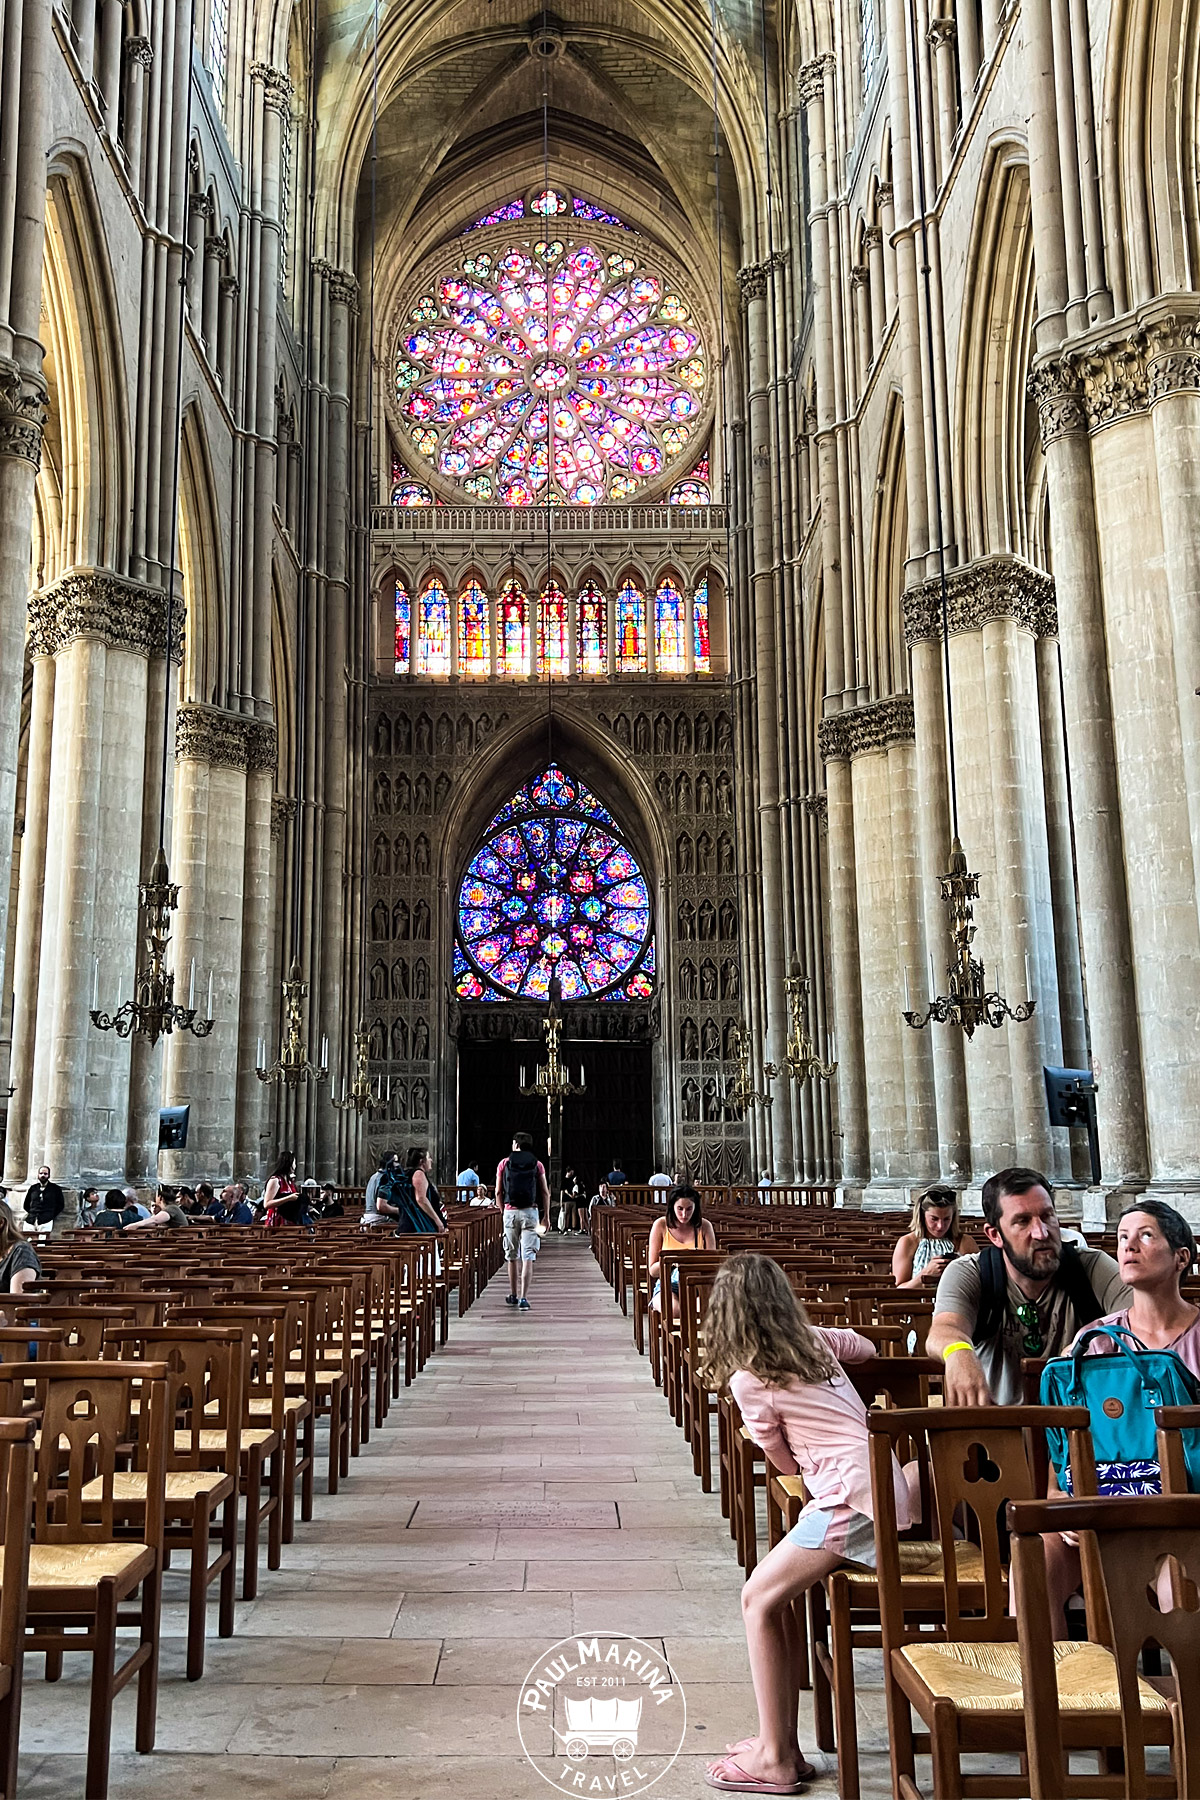 Reims Cathedral rose windows